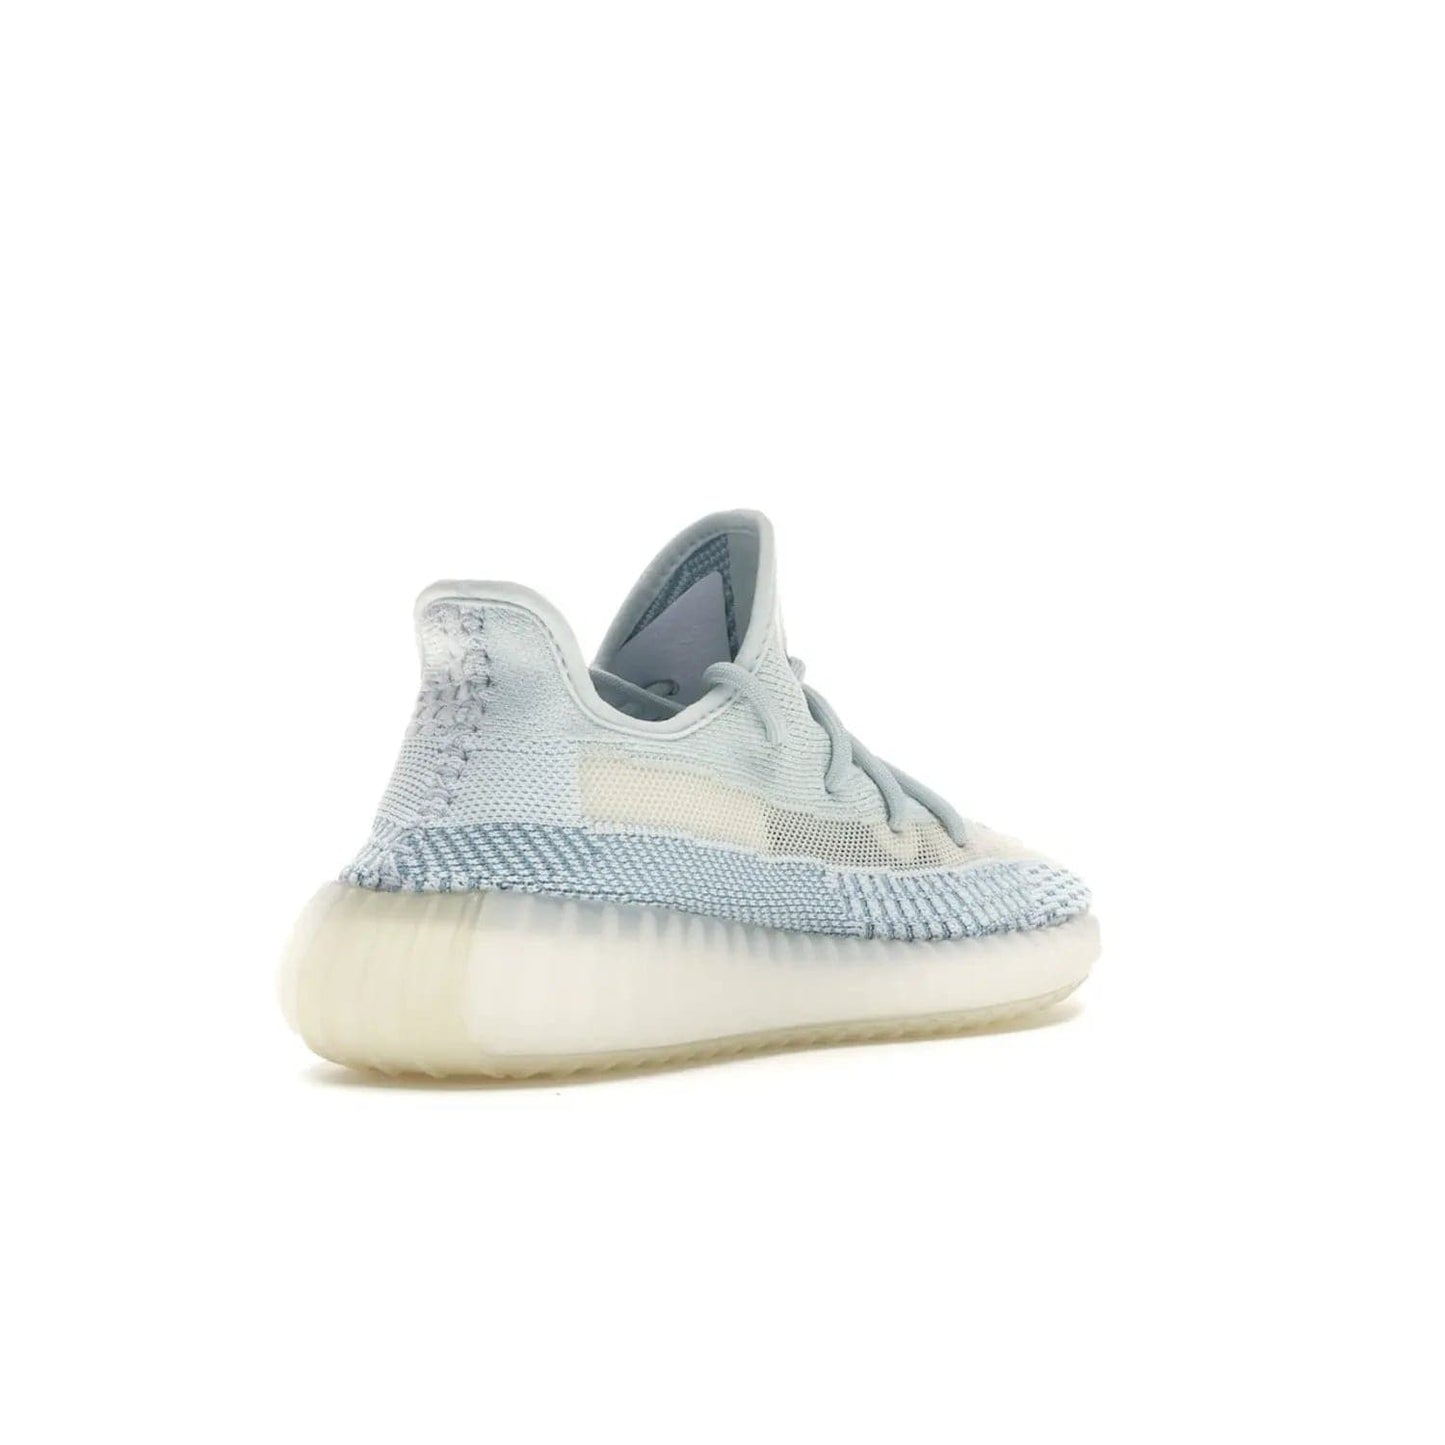 adidas Yeezy Boost 350 V2 Cloud White (Non-Reflective) - Image 32 - Only at www.BallersClubKickz.com - Adidas Yeezy Boost 350 V2 Cloud White (Non-Reflective) features Primeknit fabric and a unique, eye-catching design of cream, bluish-white, and transparent strip. Step out in timeless style with this eye-catching sneaker.